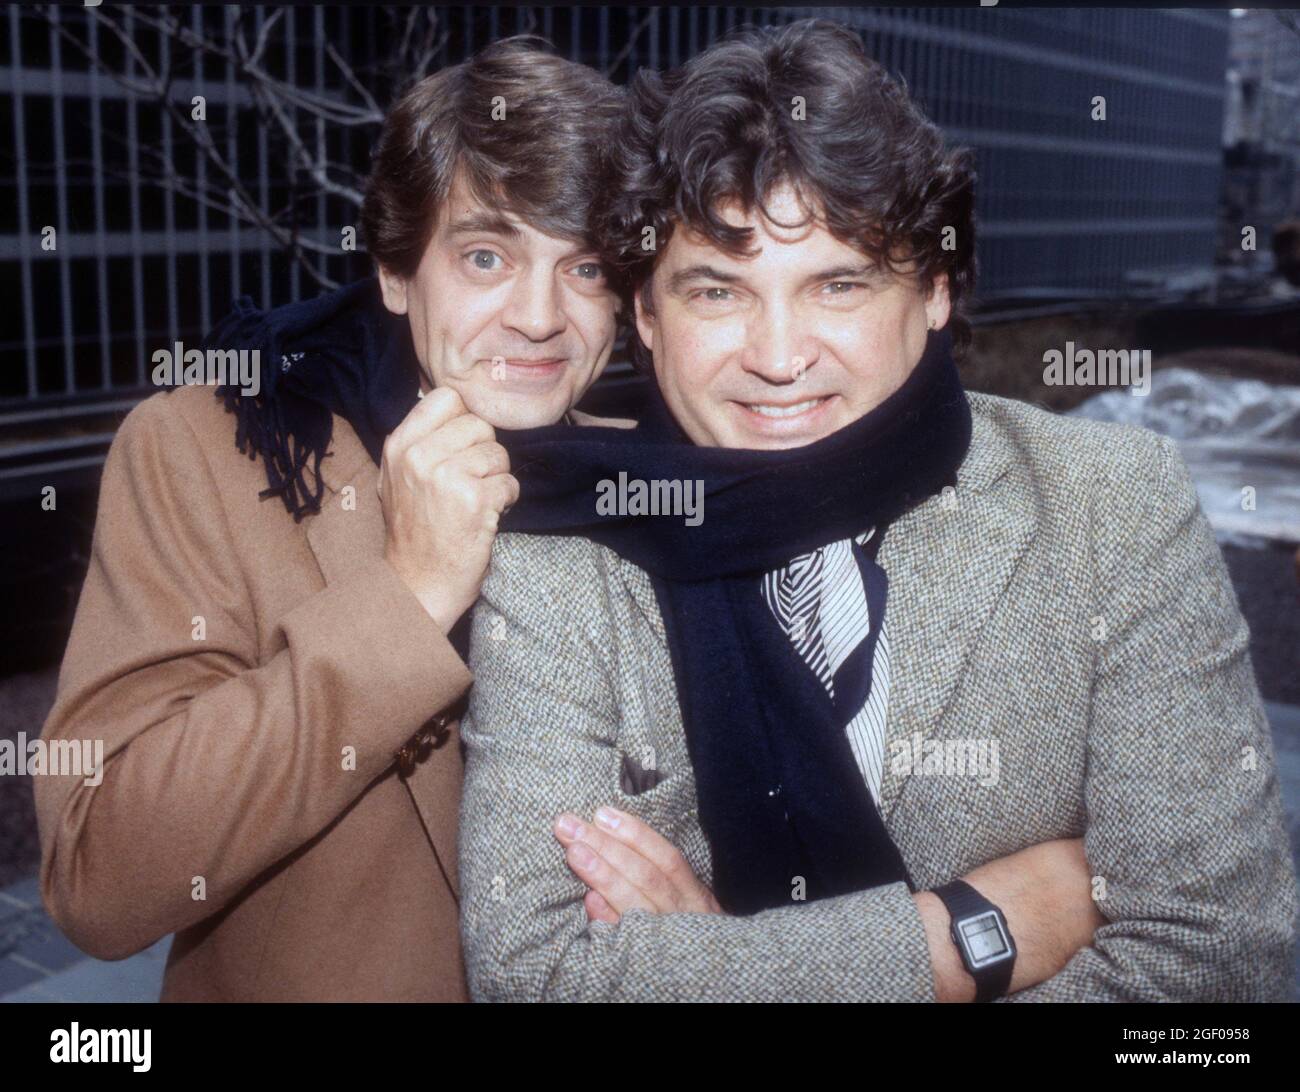 **FILE PHOTO** Don Everly Of The Everly Brothers Has Passed Away.  Phil Everly and Don Everly, The Everly Brothers, Circa 1980's Credit: Adam Scull/PHOTOlink/MediaPunch Stock Photo